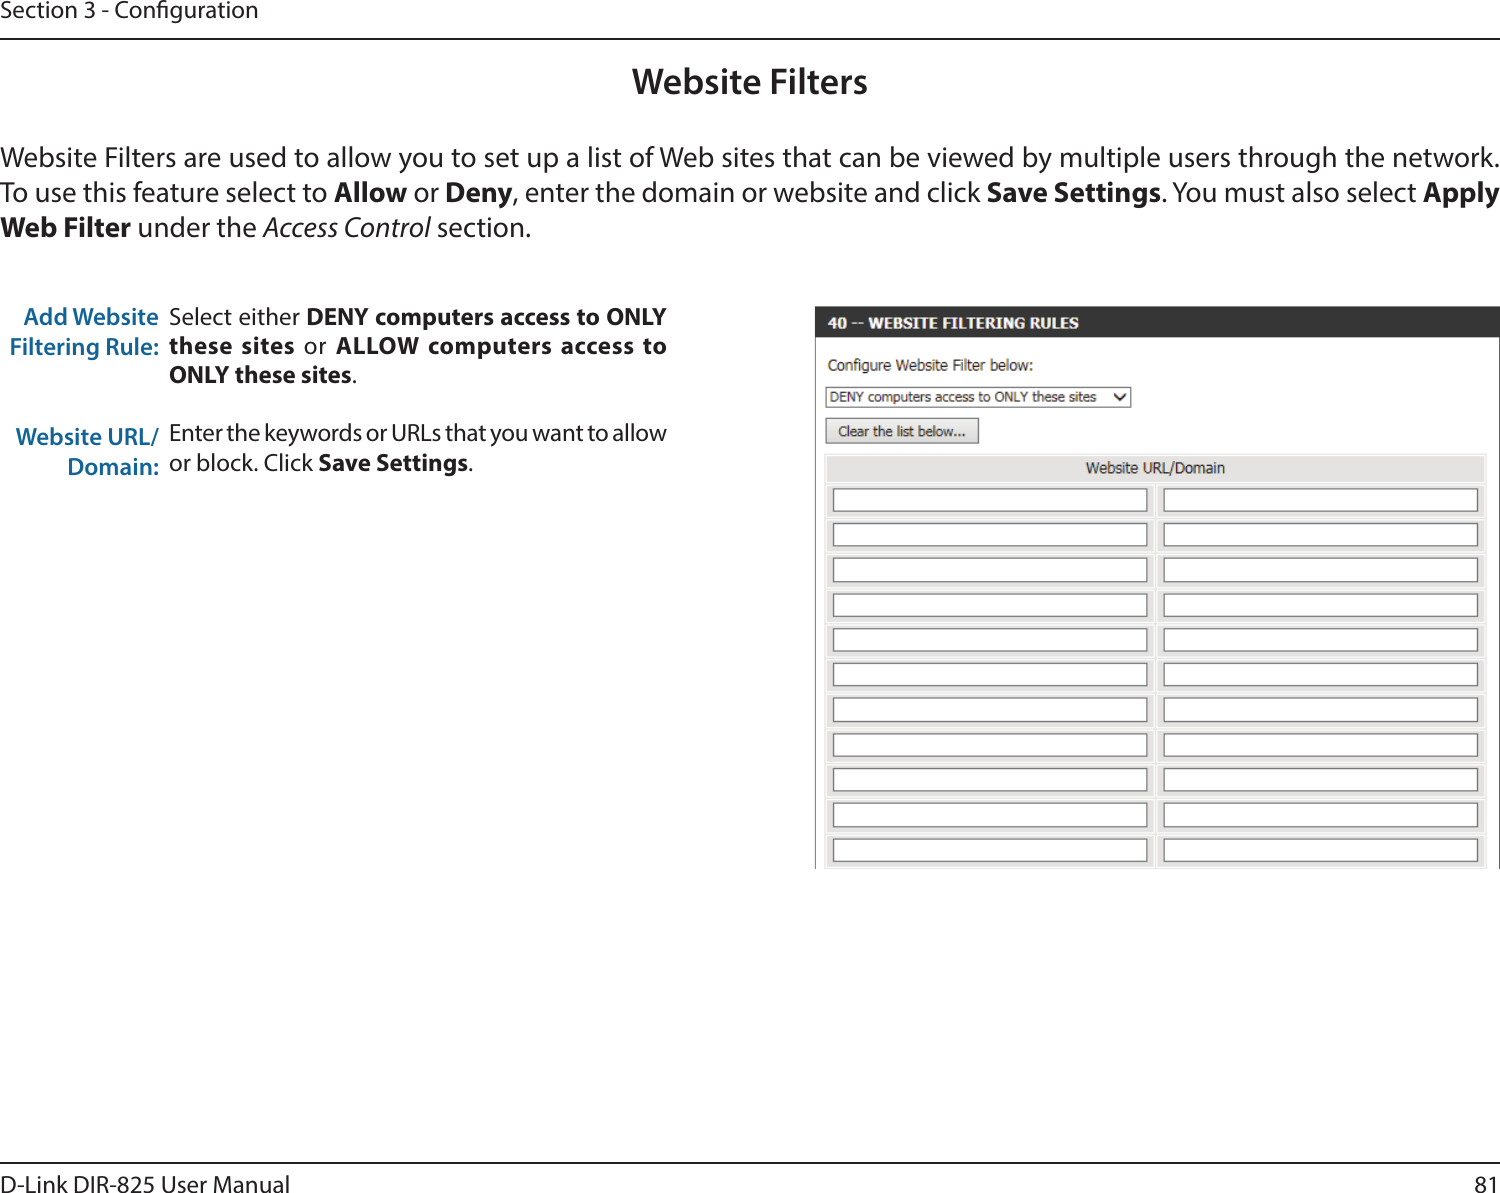 81D-Link DIR-825 User ManualSection 3 - CongurationAdd Website Filtering Rule:Website URL/Domain:Website FiltersSelect either DENY computers access to ONLY these sites or ALLOW computers access to ONLY these sites.Enter the keywords or URLs that you want to allow or block. Click Save Settings.Website Filters are used to allow you to set up a list of Web sites that can be viewed by multiple users through the network. To use this feature select to Allow or Deny, enter the domain or website and click Save Settings. You must also select Apply Web Filter under the Access Control section.